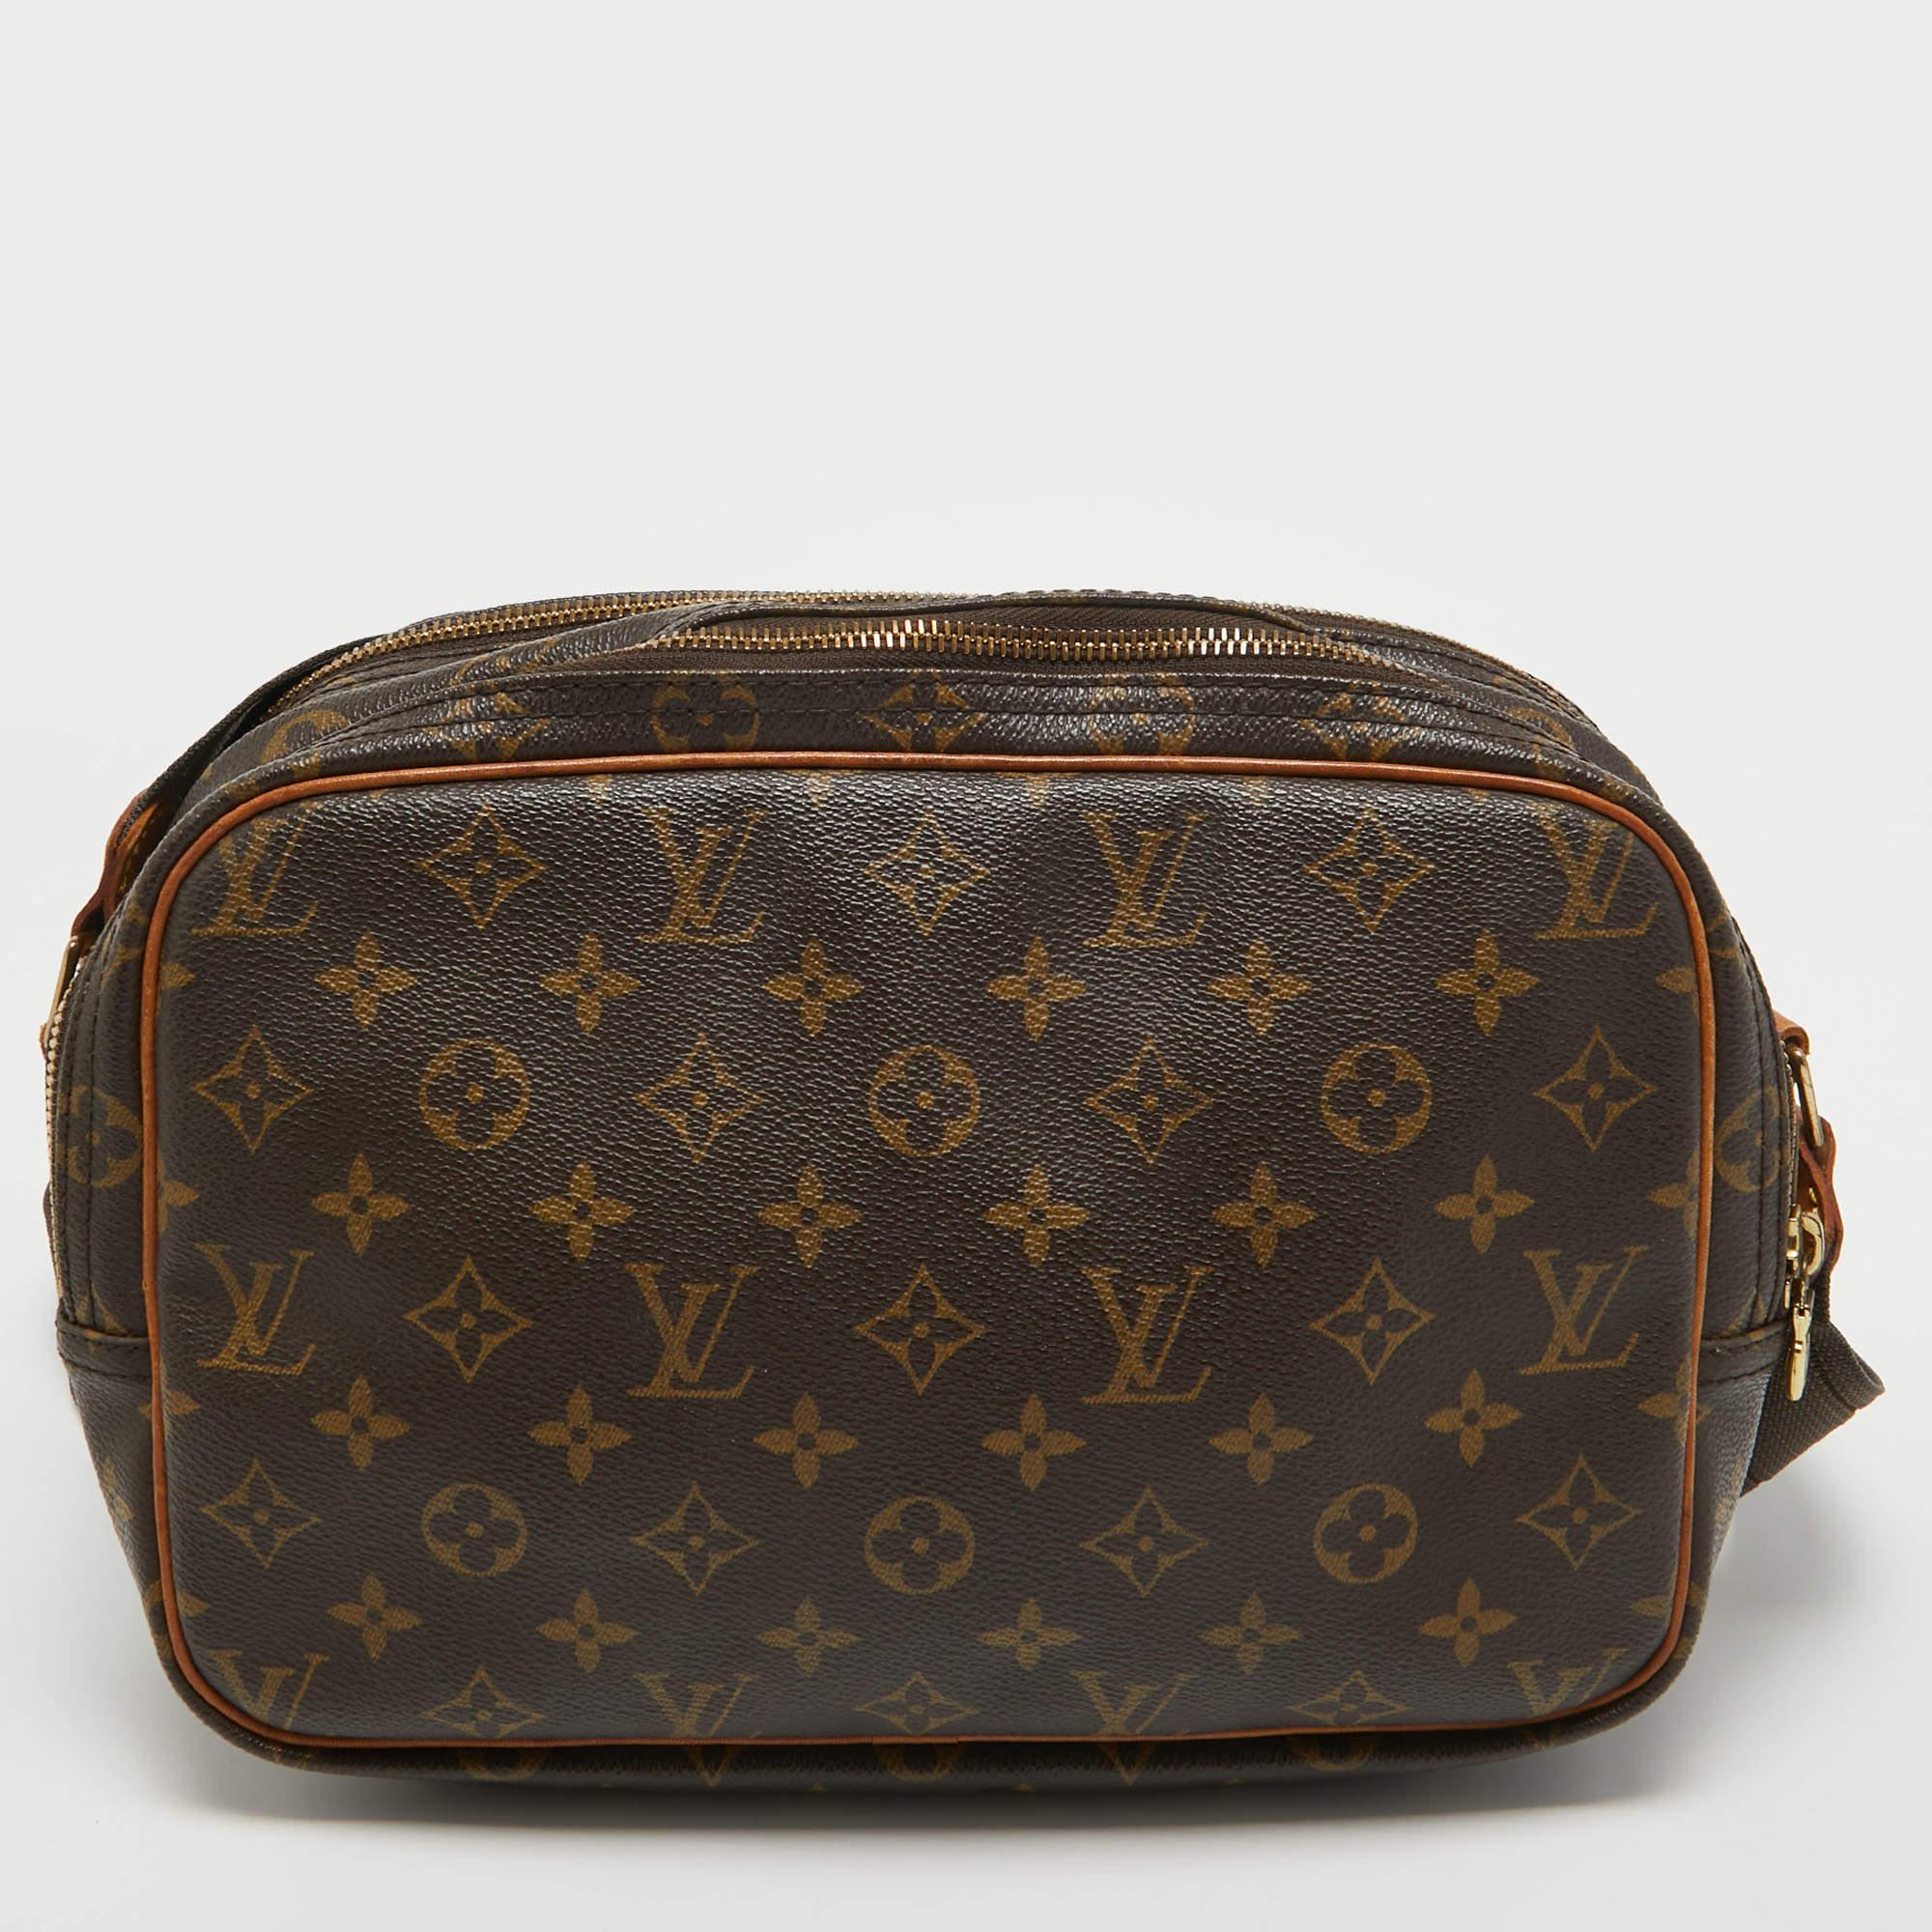 Perfect for conveniently housing your essentials in one place, this Louis Vuitton Reporter PM bag is a worthy investment. It has notable details and offers a look of luxury.

